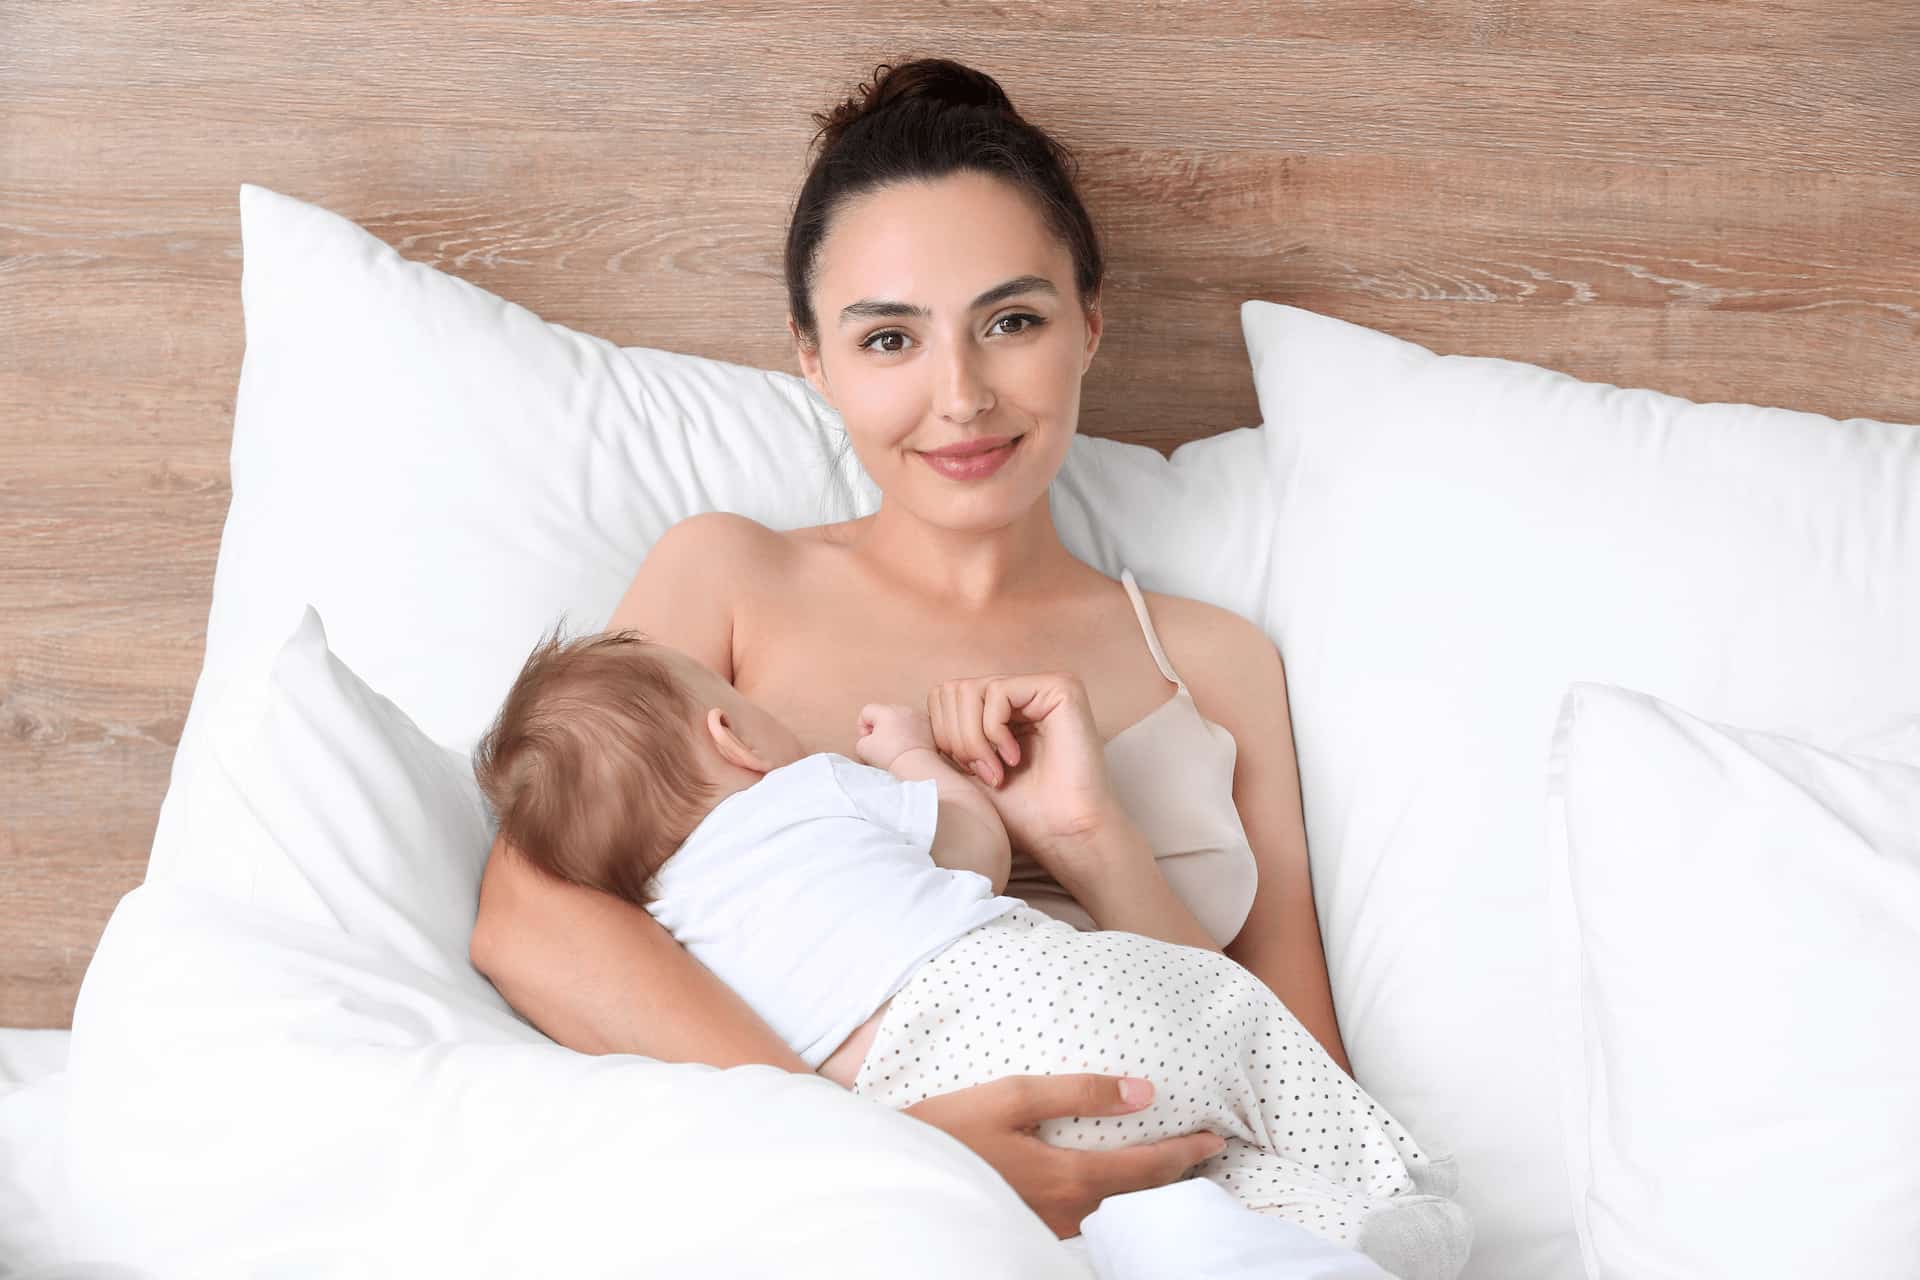 Can You Breastfeed with Implants?